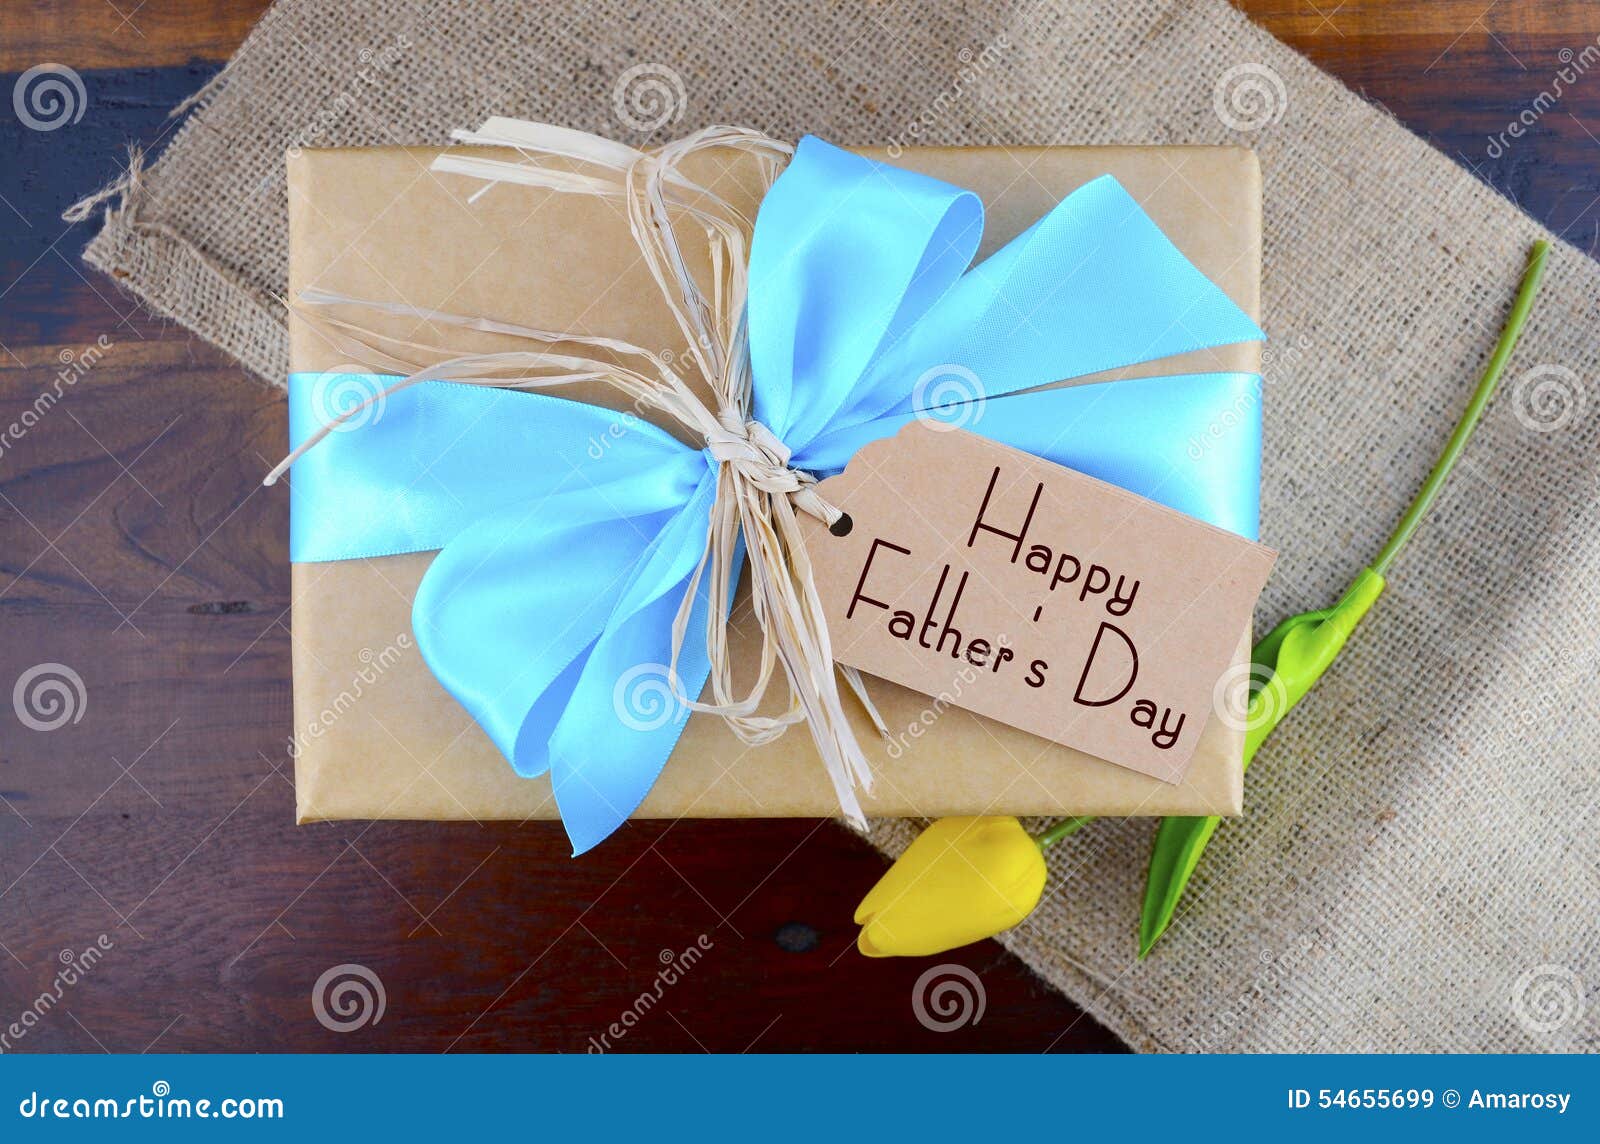 happy fathers day natural kraft paper gift